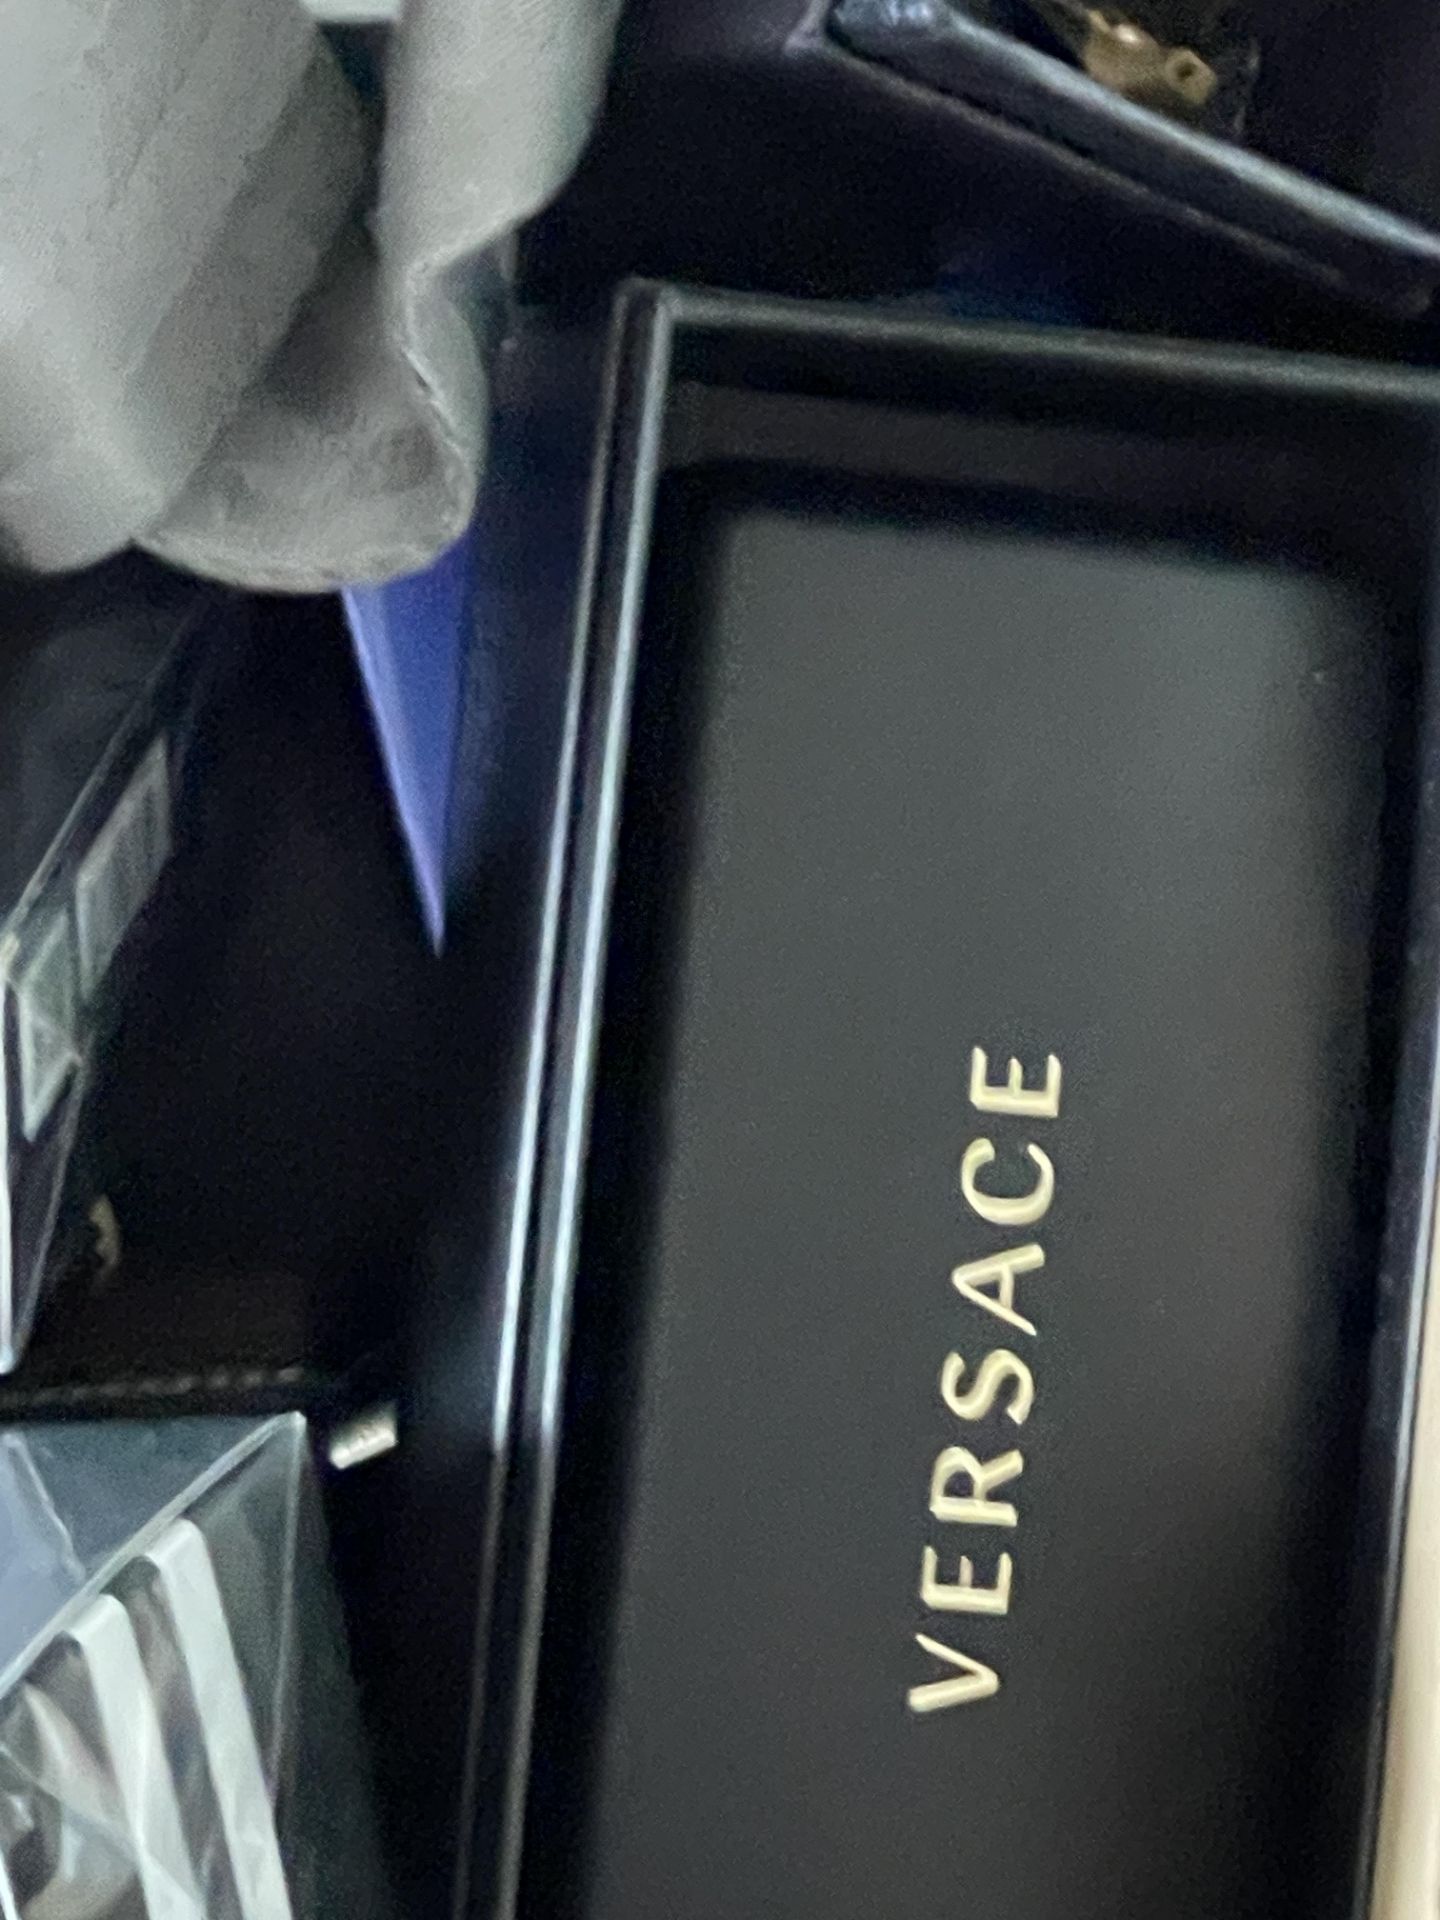 Aftershaves mystery box containing watches sunglasses ect worth - Image 6 of 31